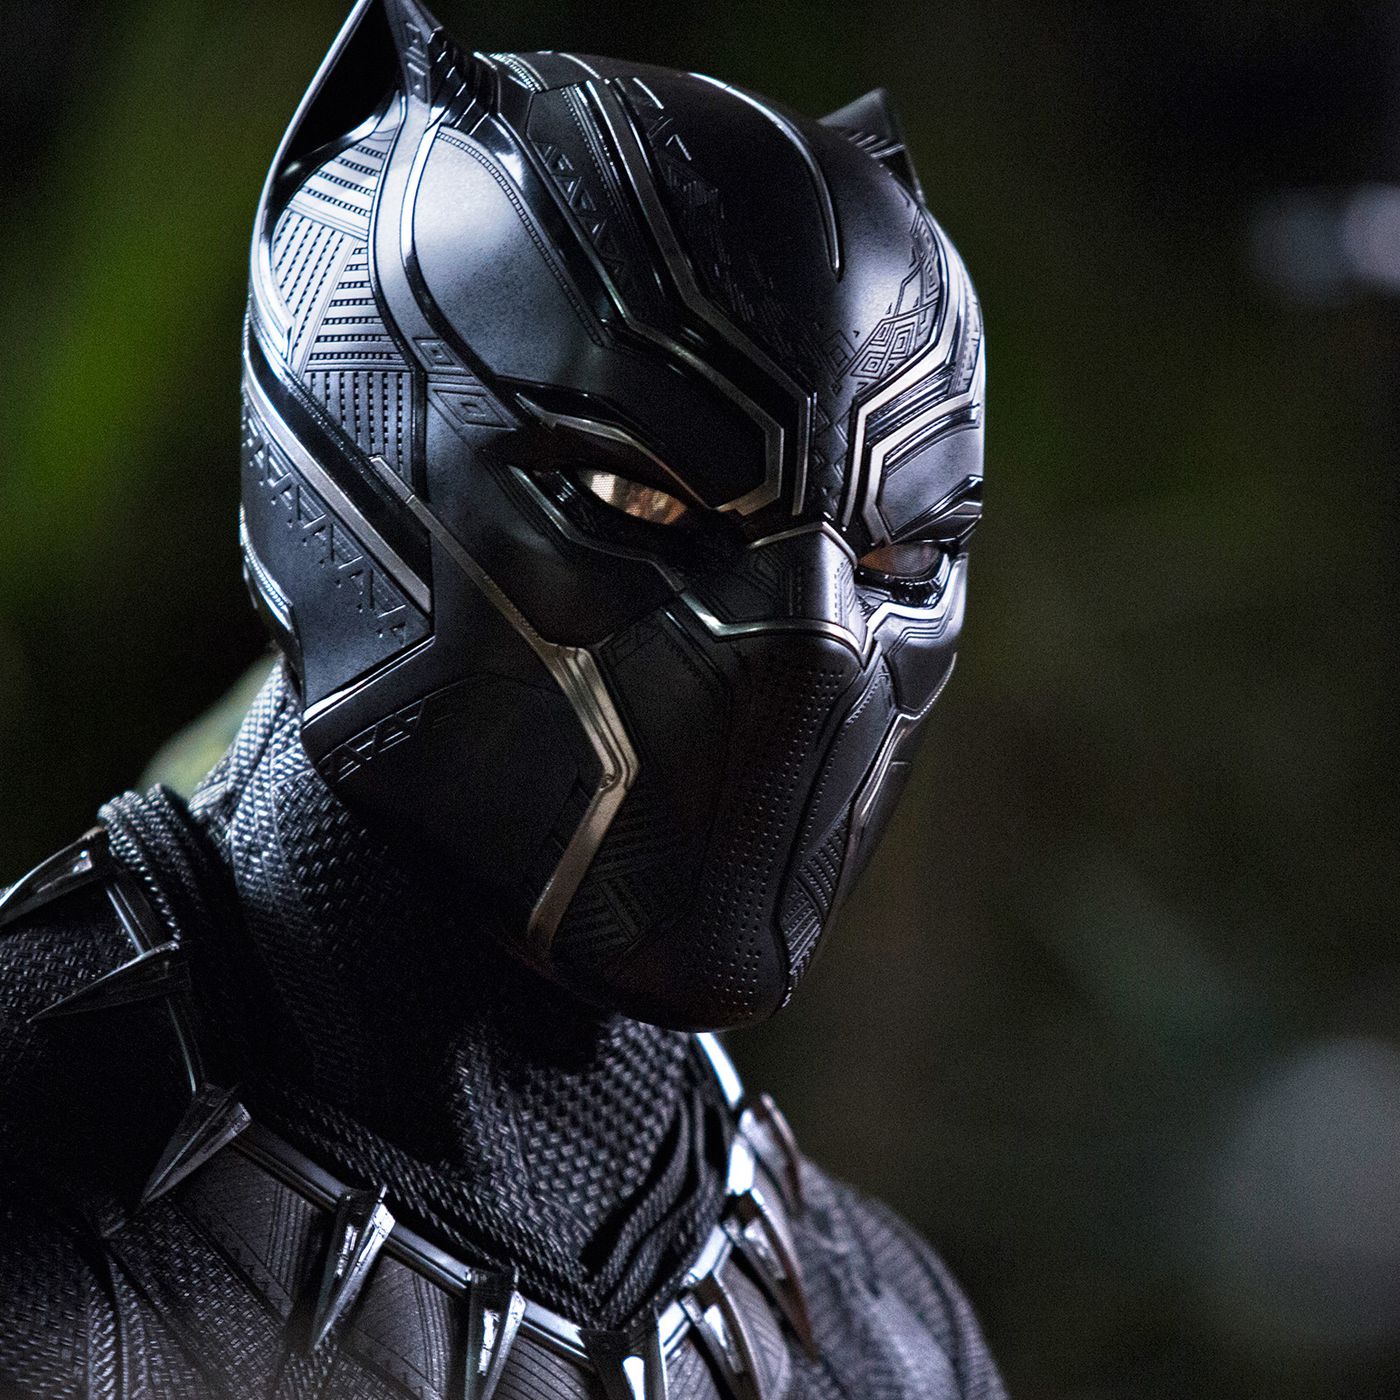 Black Panther 2: Wakanda Forever release date announced